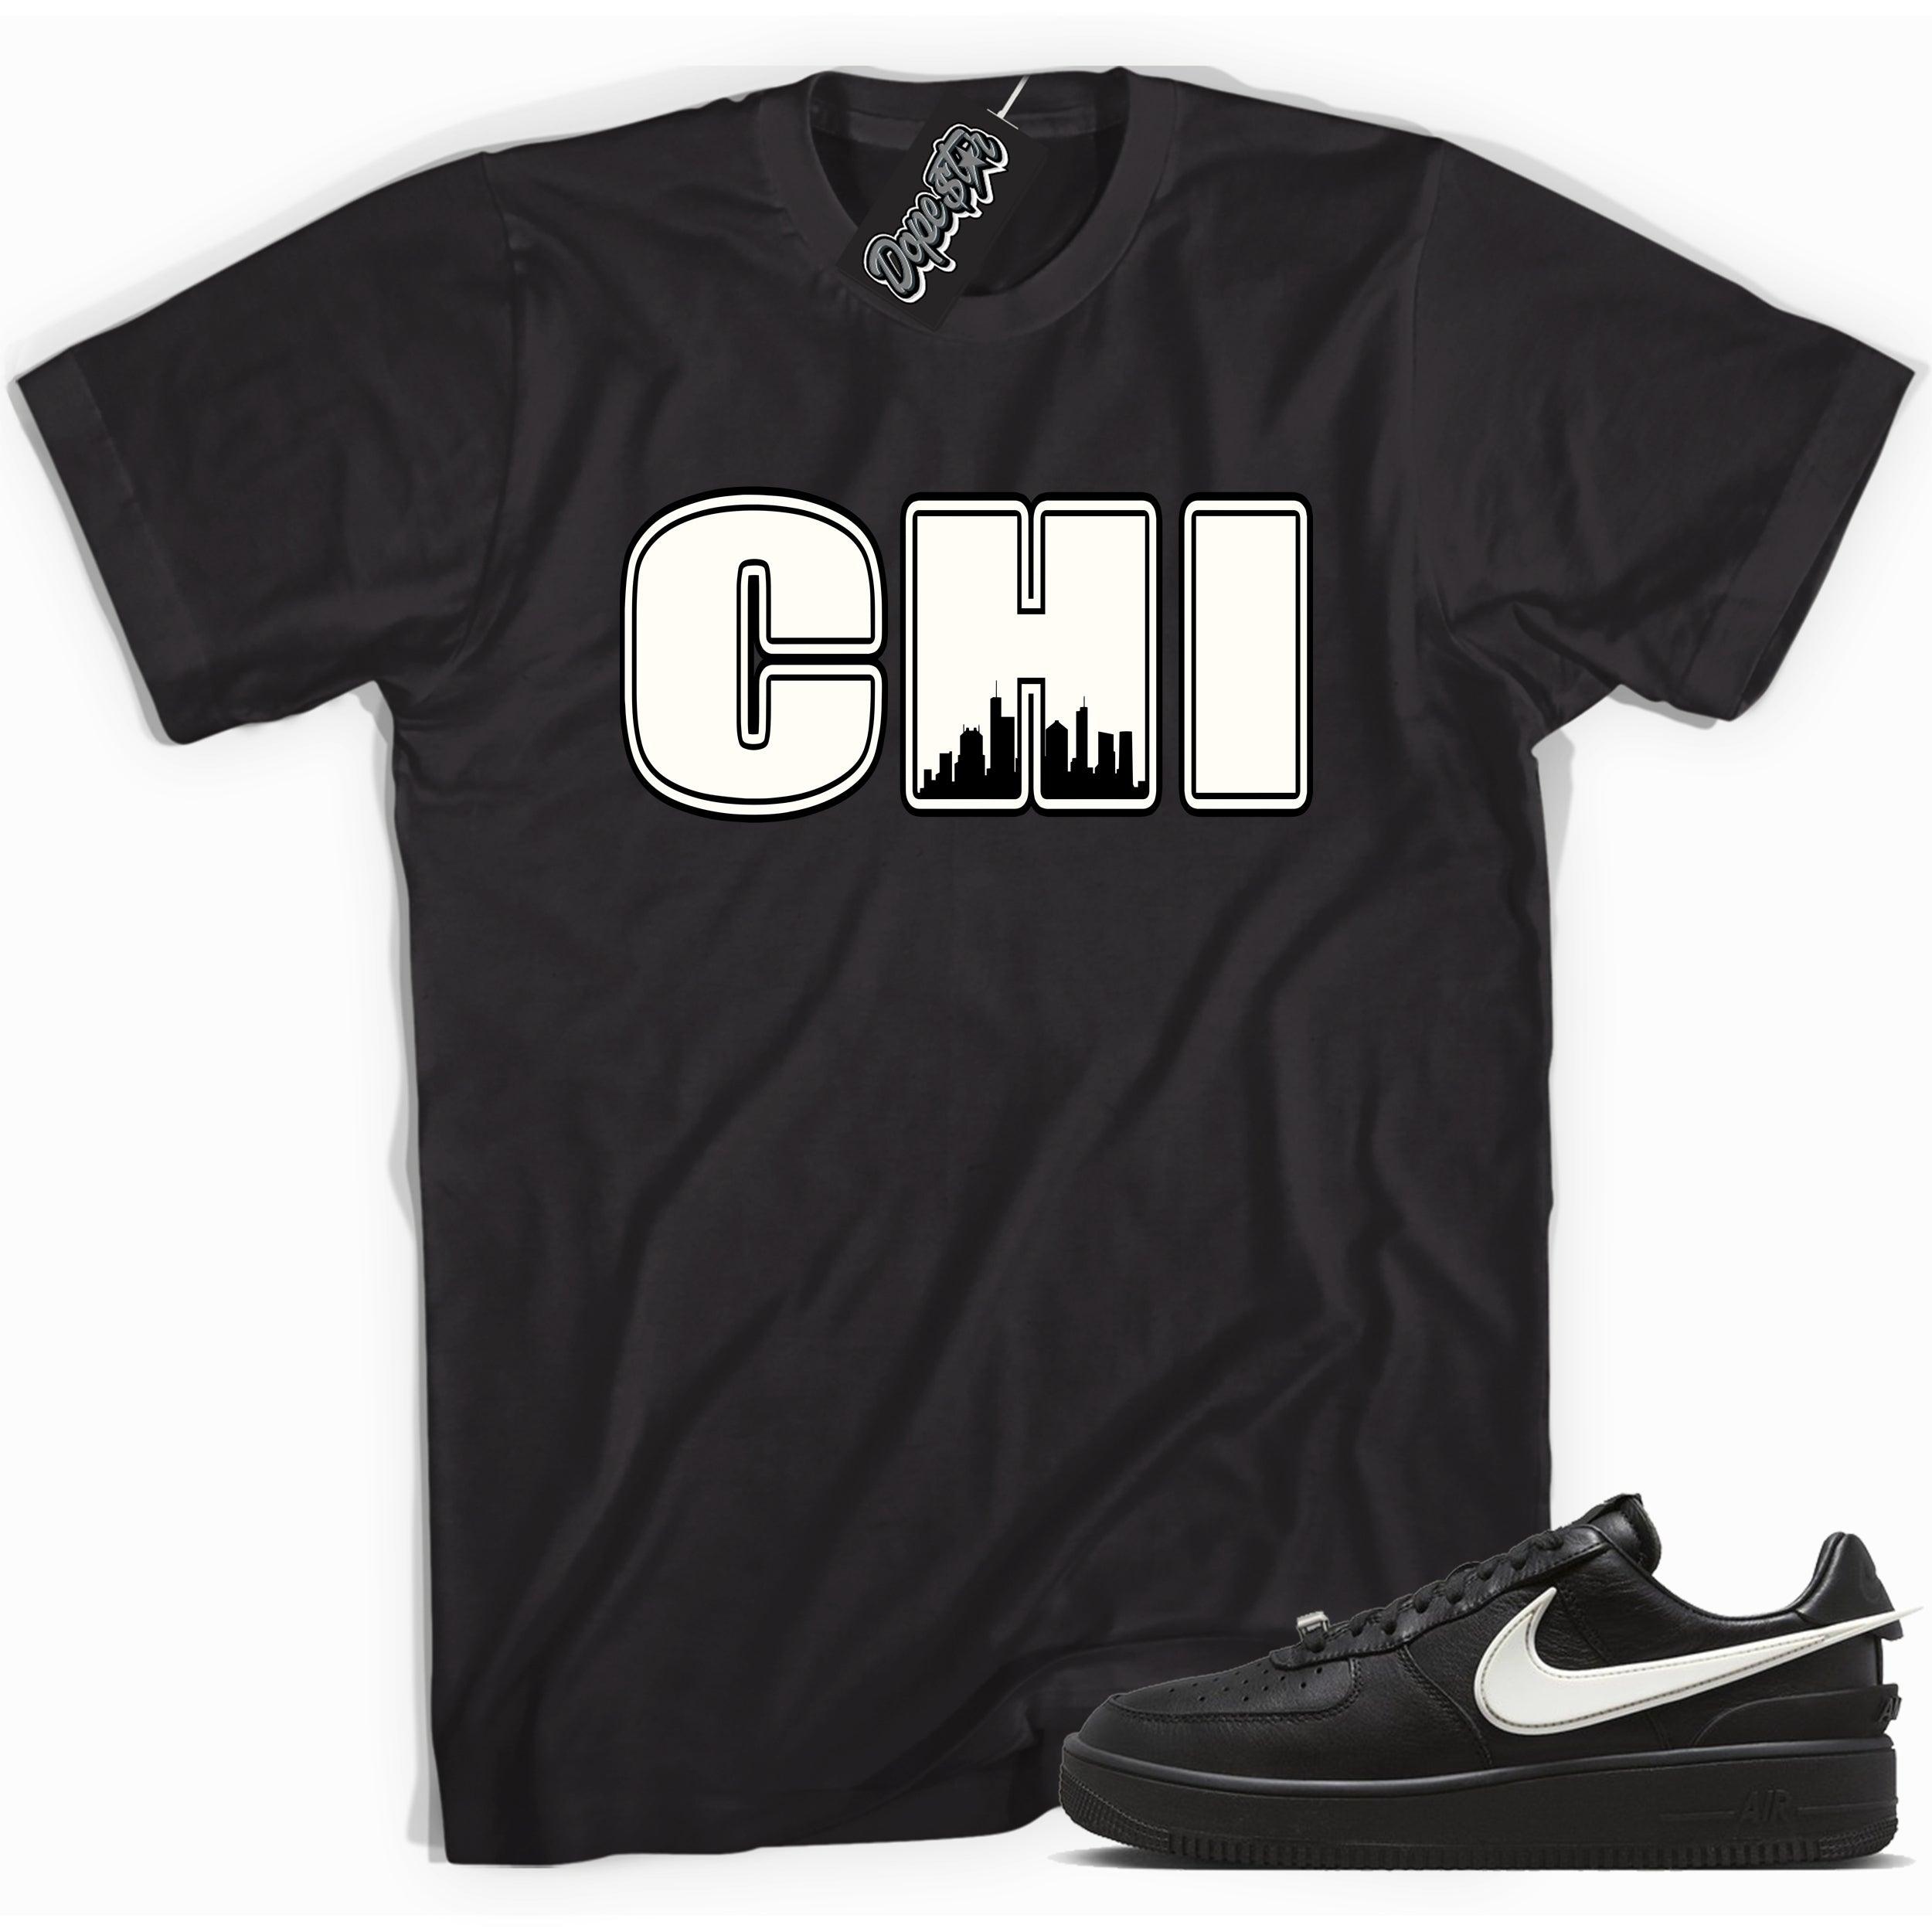 Cool black graphic tee with 'Chicago CHI TOWN' print, that perfectly matches Nike Air Force 1 Low SP Ambush Phantom sneakers.